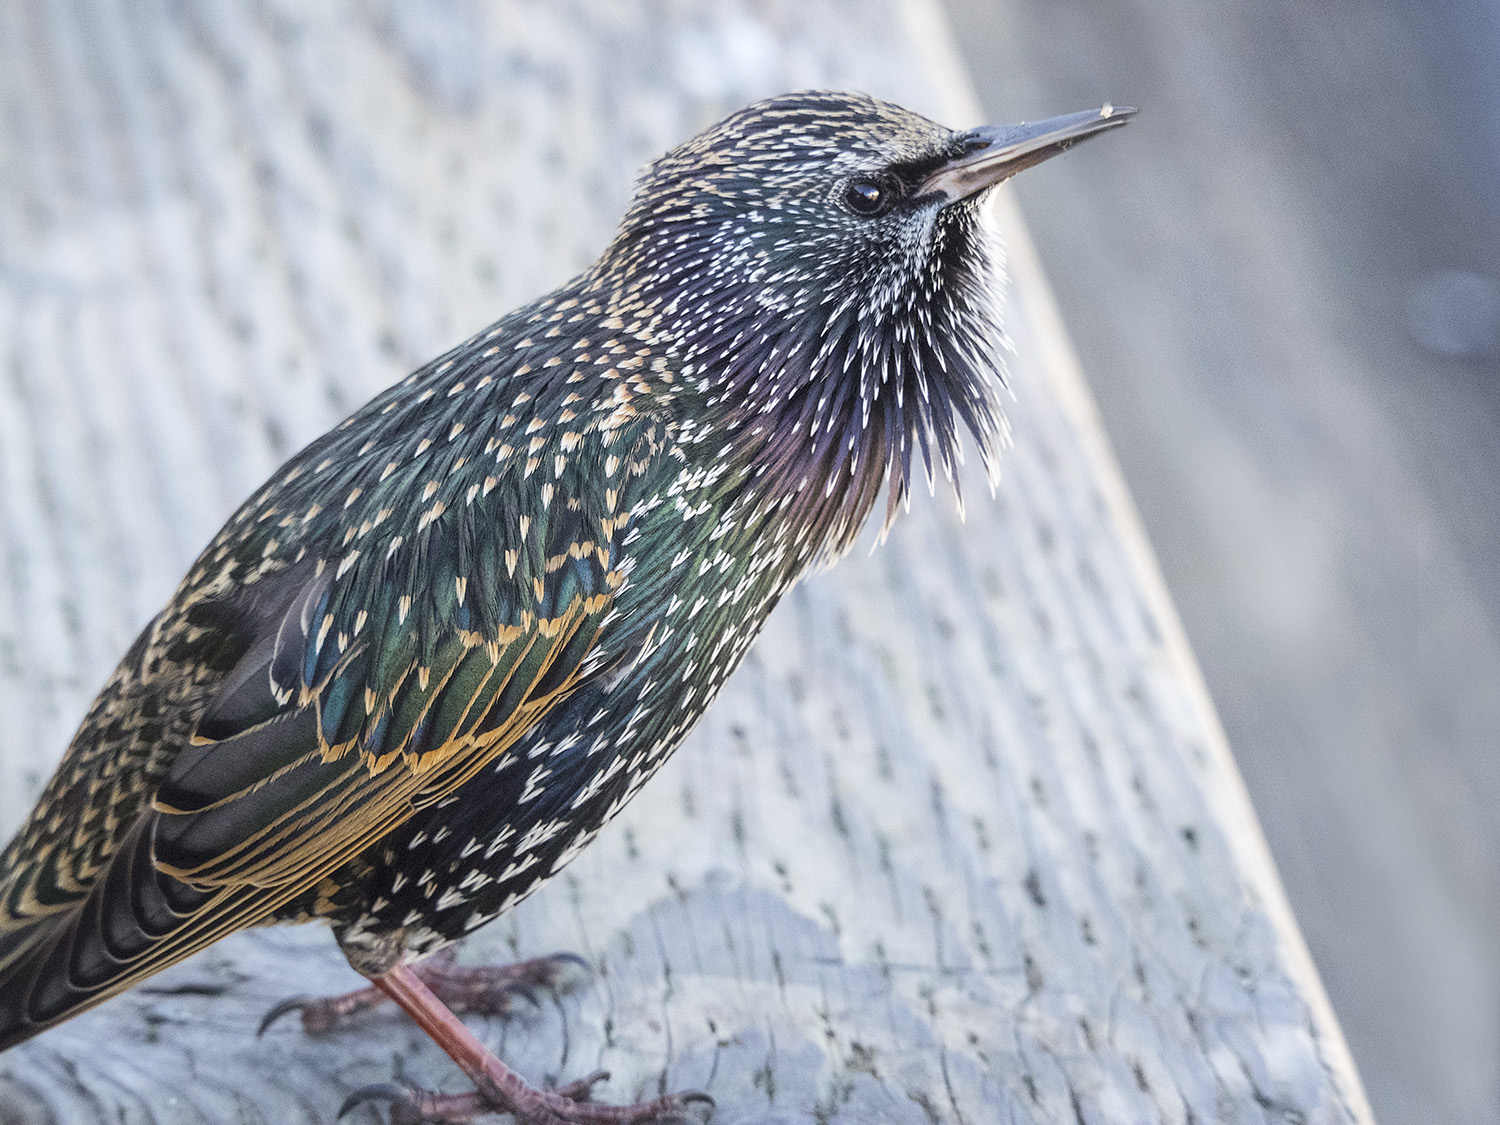 This little starling kept me company while I had a coffee at Granville Island.